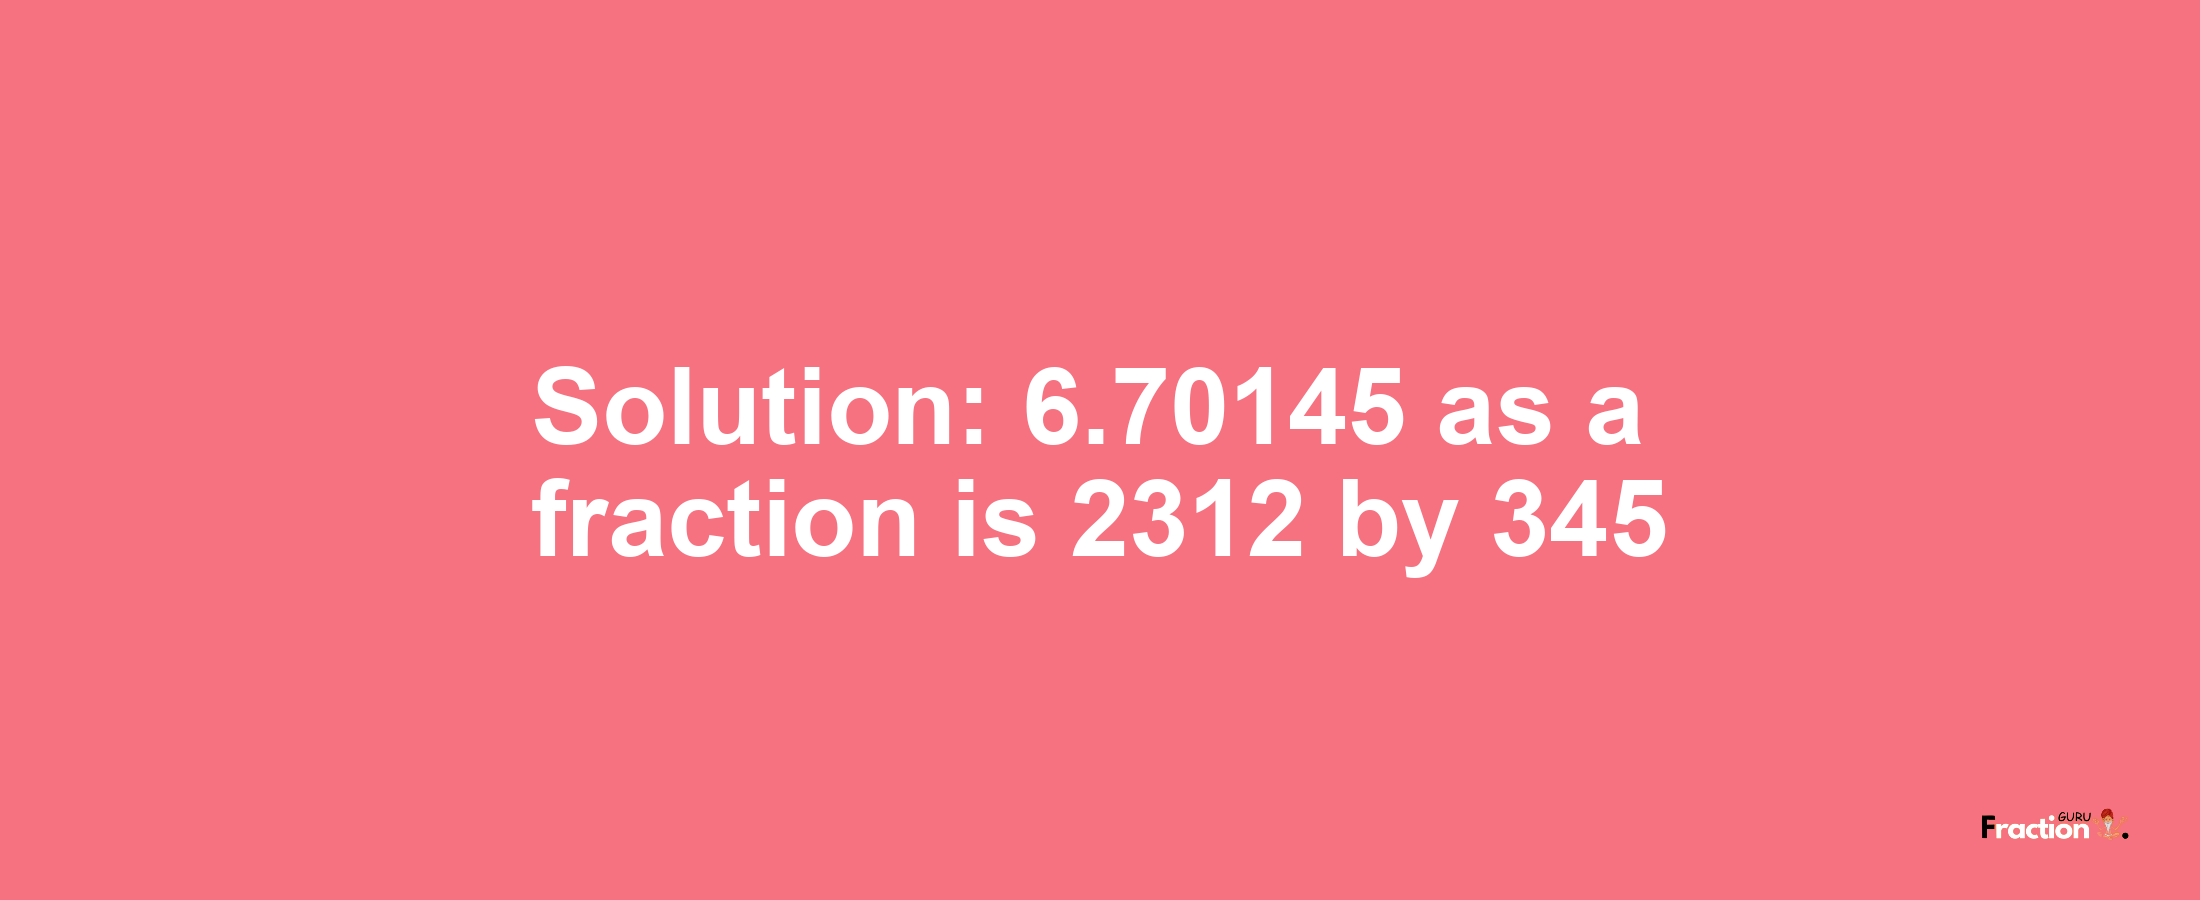 Solution:6.70145 as a fraction is 2312/345